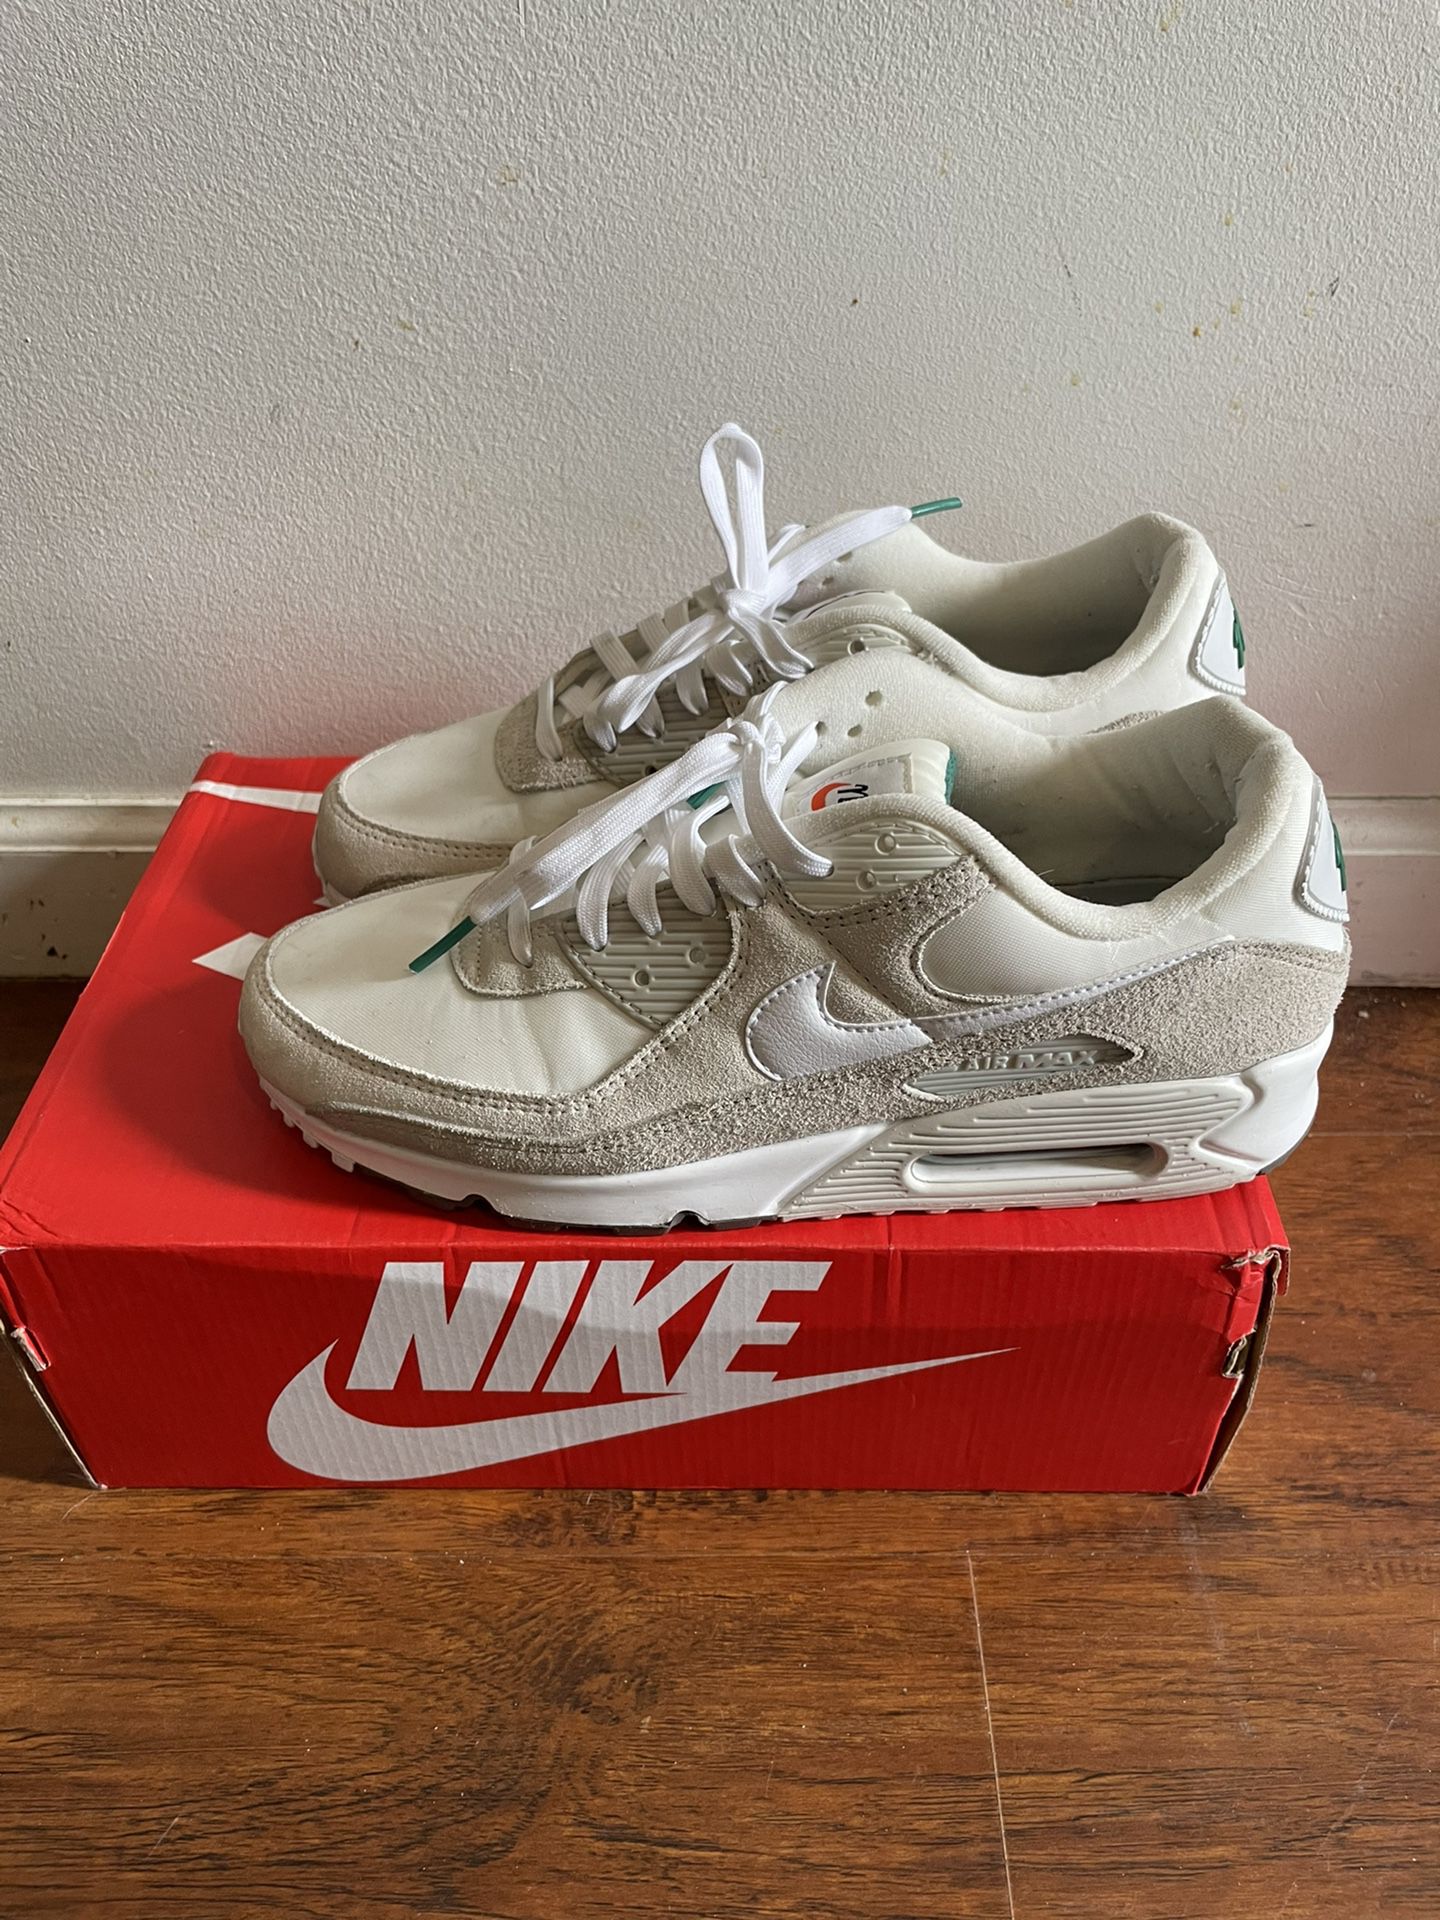 Nike Air Max 90 First Use Cream for Sale